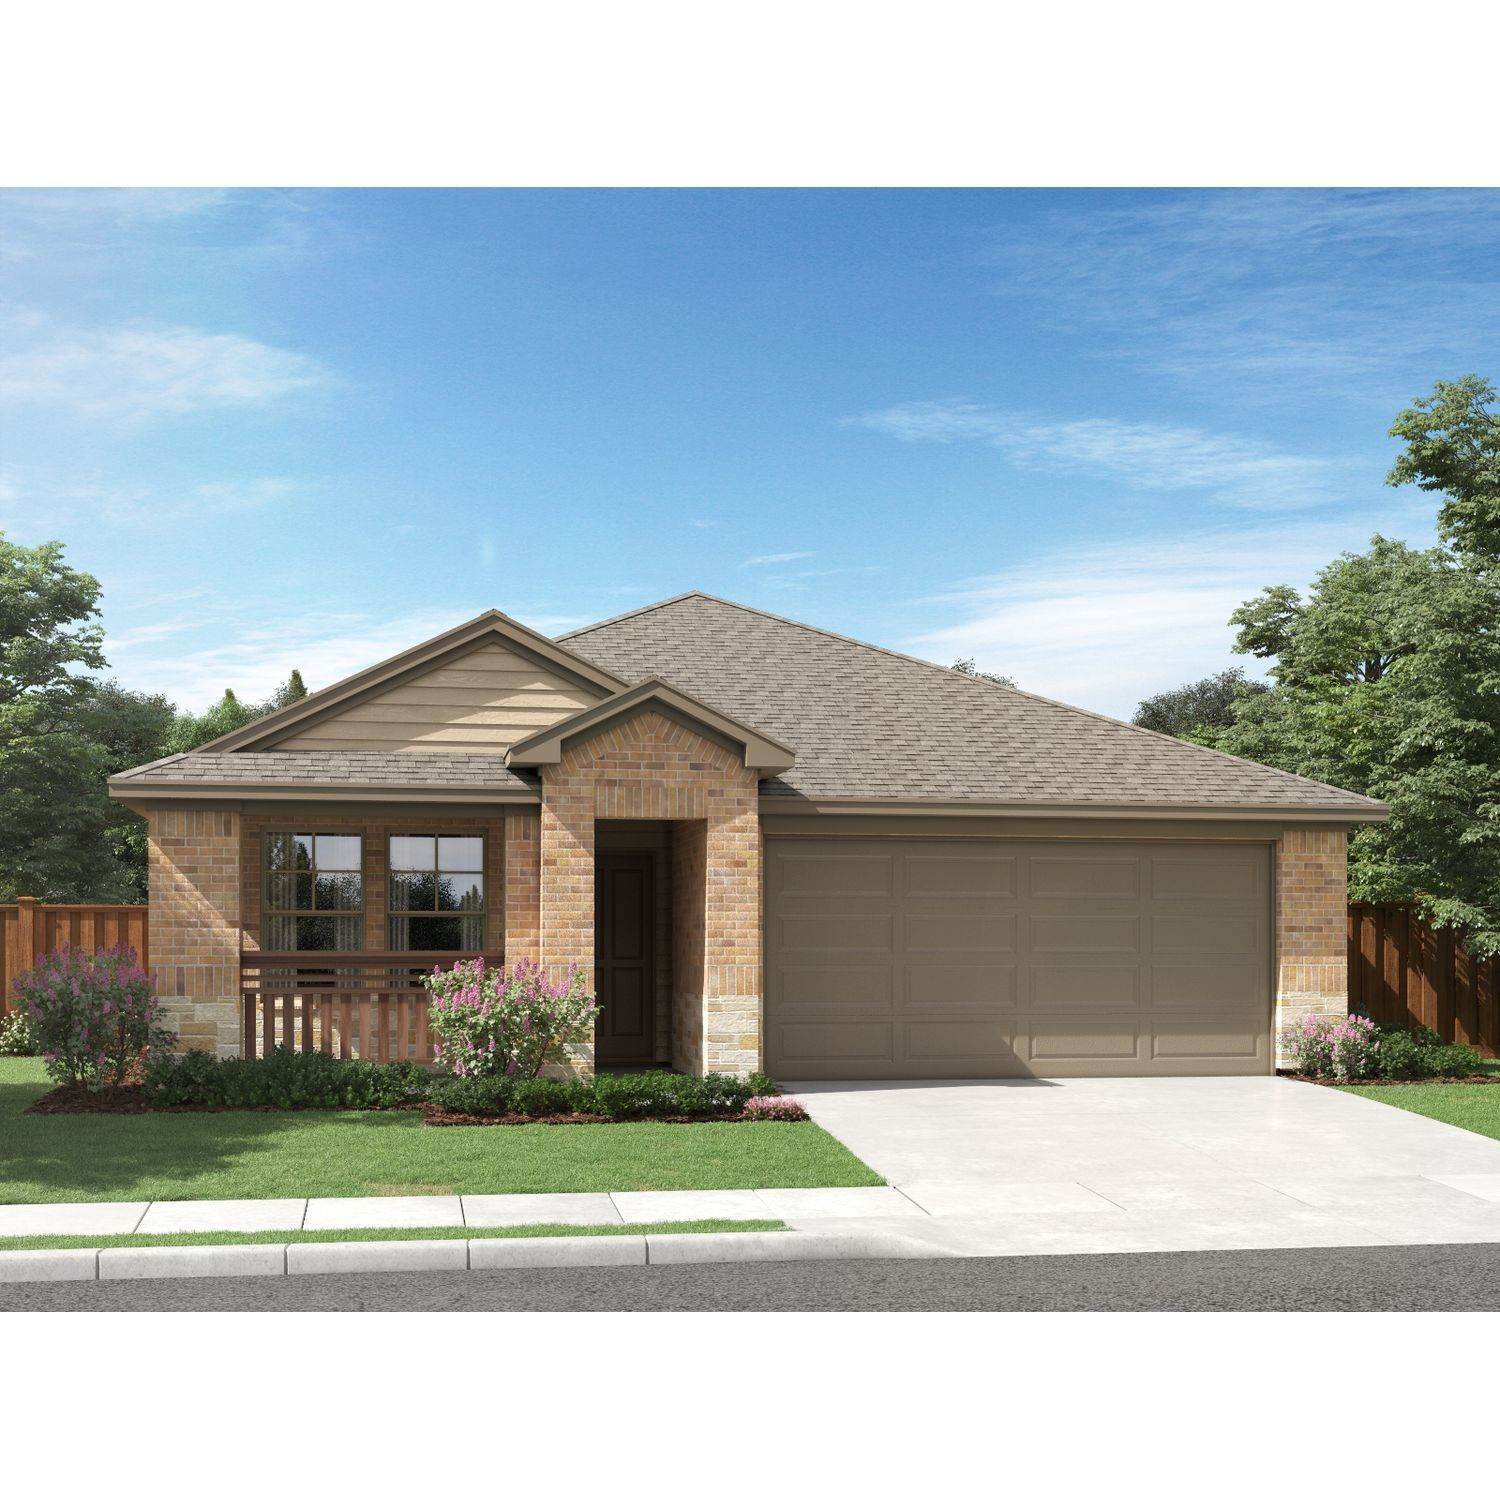 Single Family for Sale at Ventana 5525 High Bank Road, Fort Worth, TX 76126